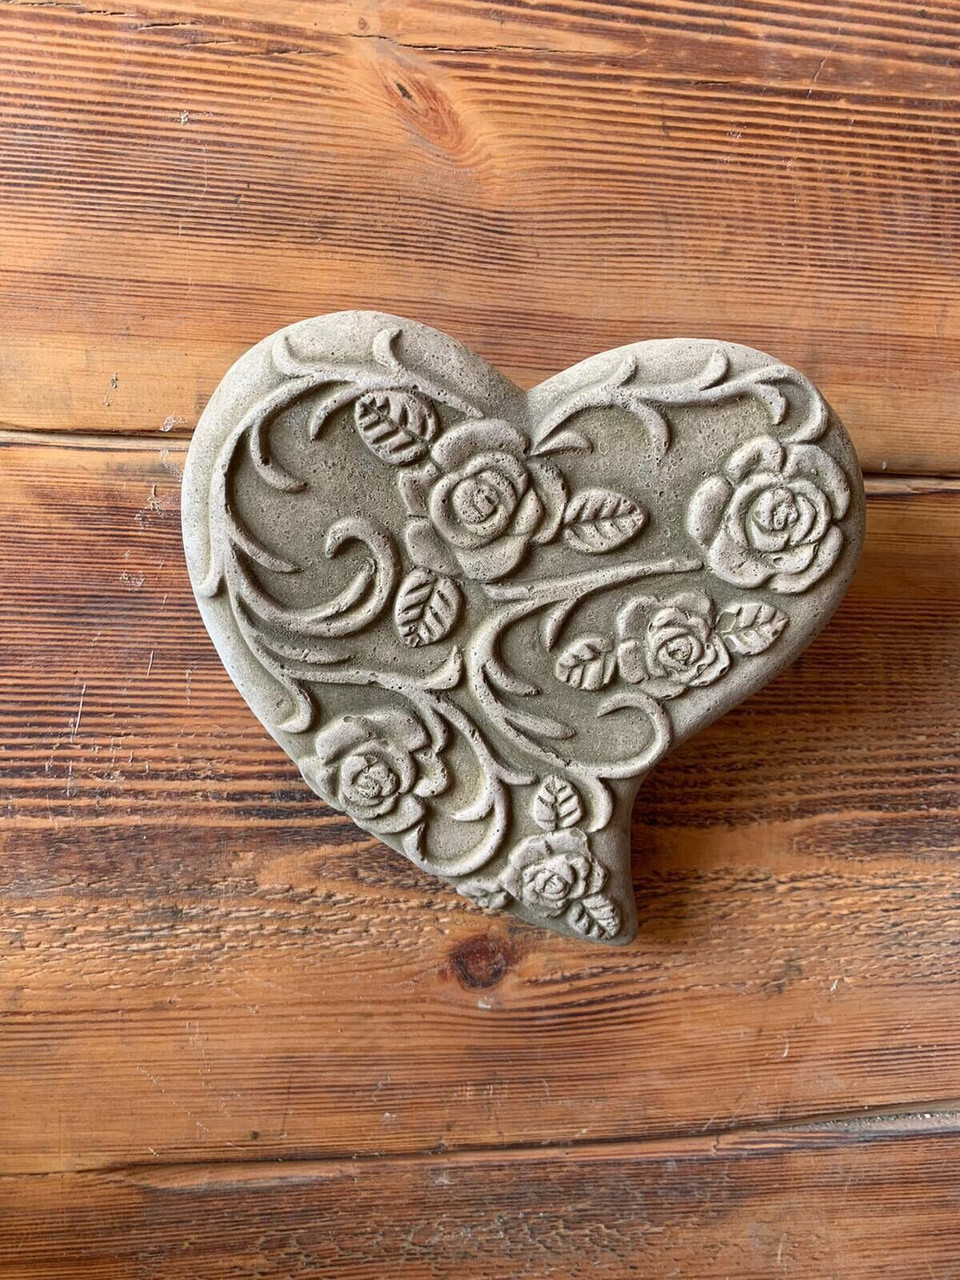 STONE GARDEN LOVE HEART WALL PLAQUE DETAILED HANGING ORNAMENT